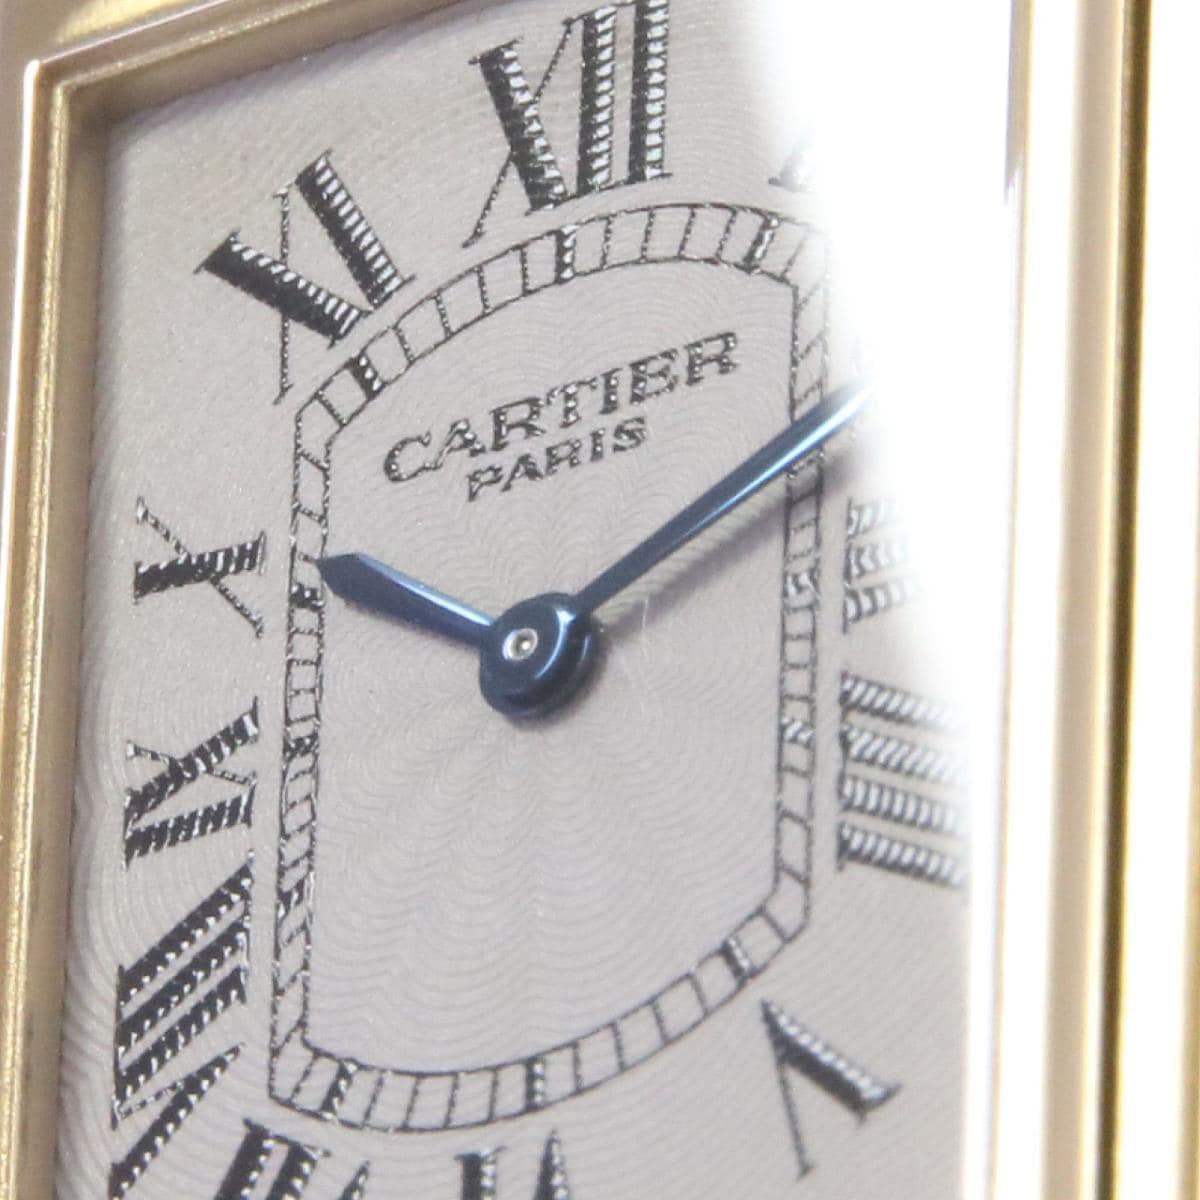 Cartier W1526251 Tank Vasculant LM YG LIMITED Manual Winding